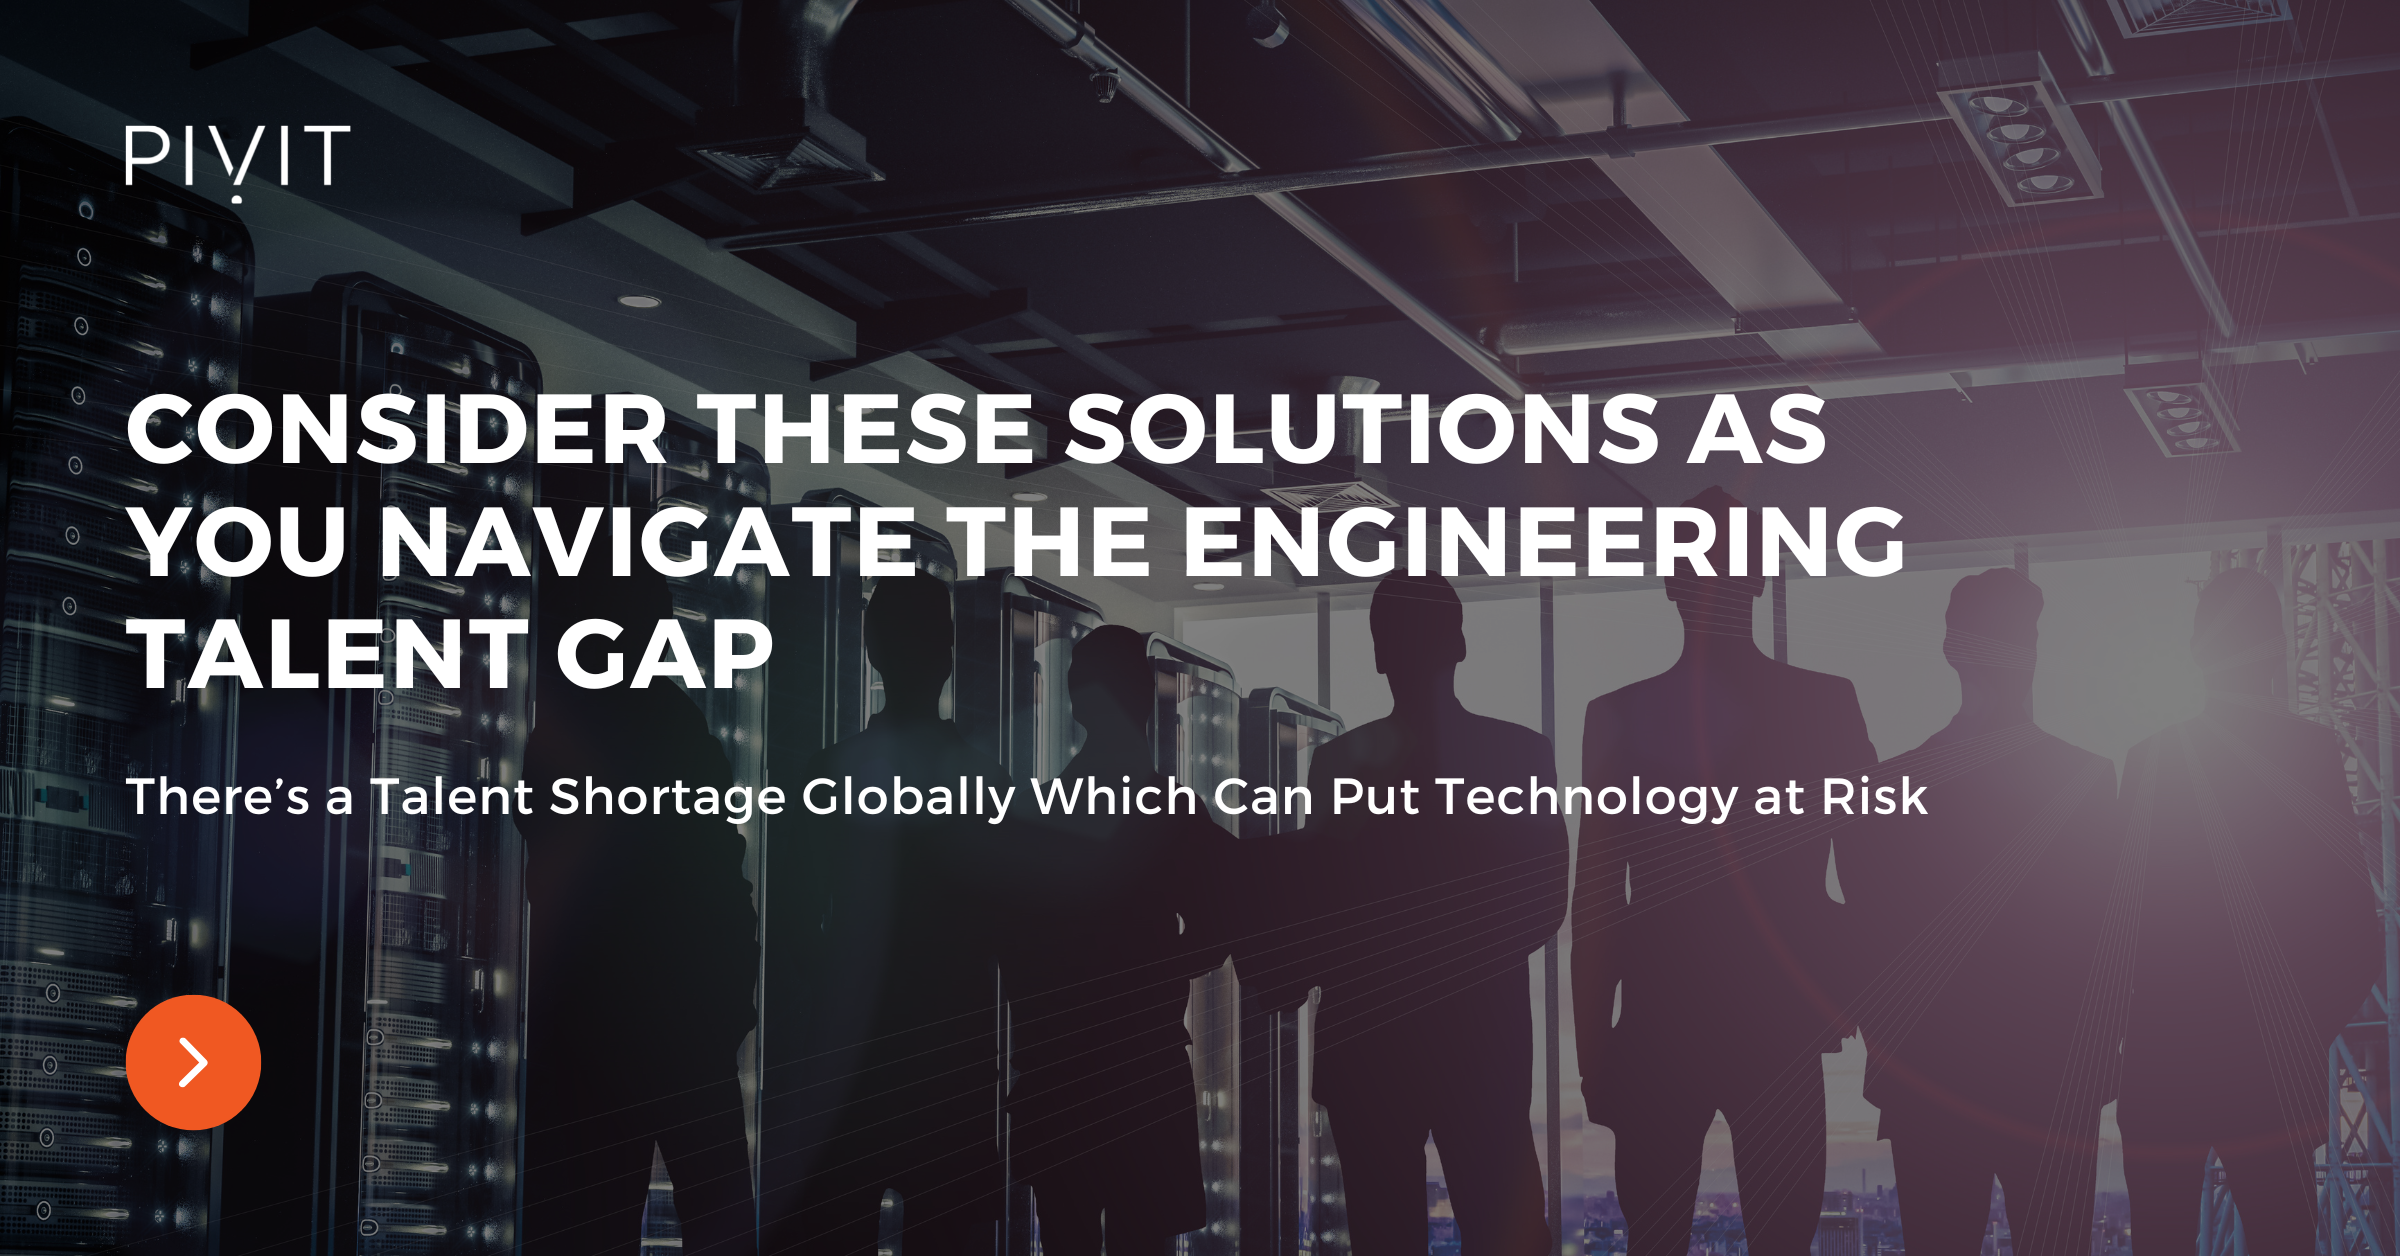 Consider These Solutions as You Navigate the Engineering Talent Gap - There’s a Talent Shortage Globally Which Can Put Technology at Risk